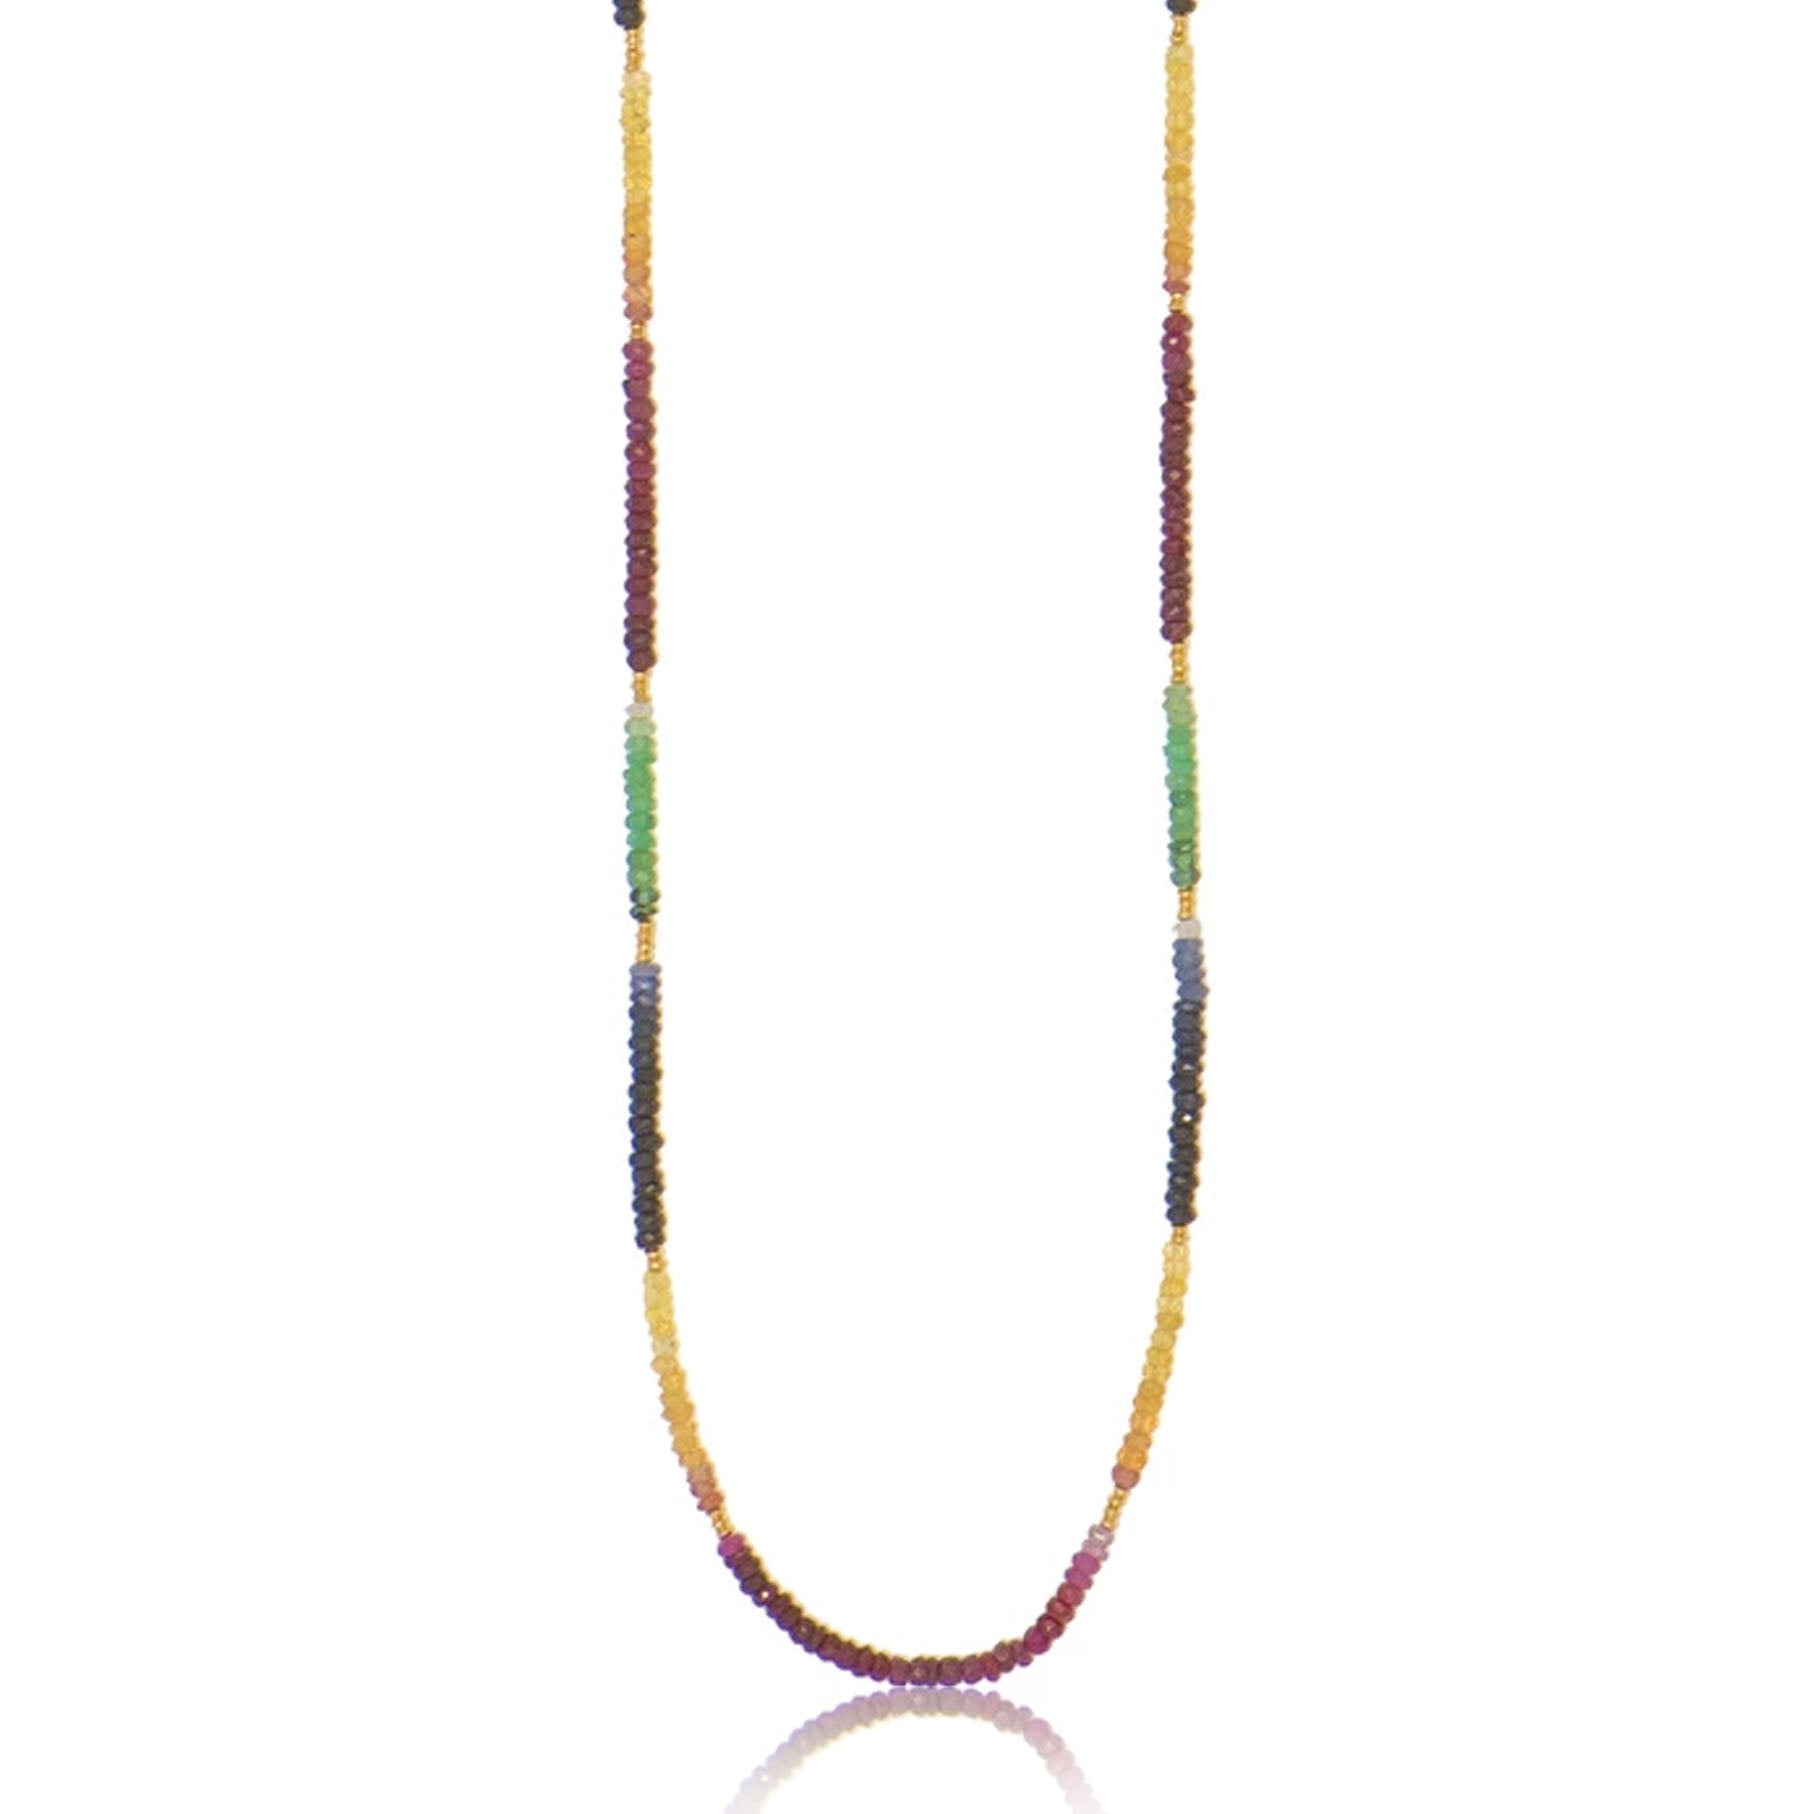 Long Rondel Necklace with Ruby, Sapphire and Emeralds